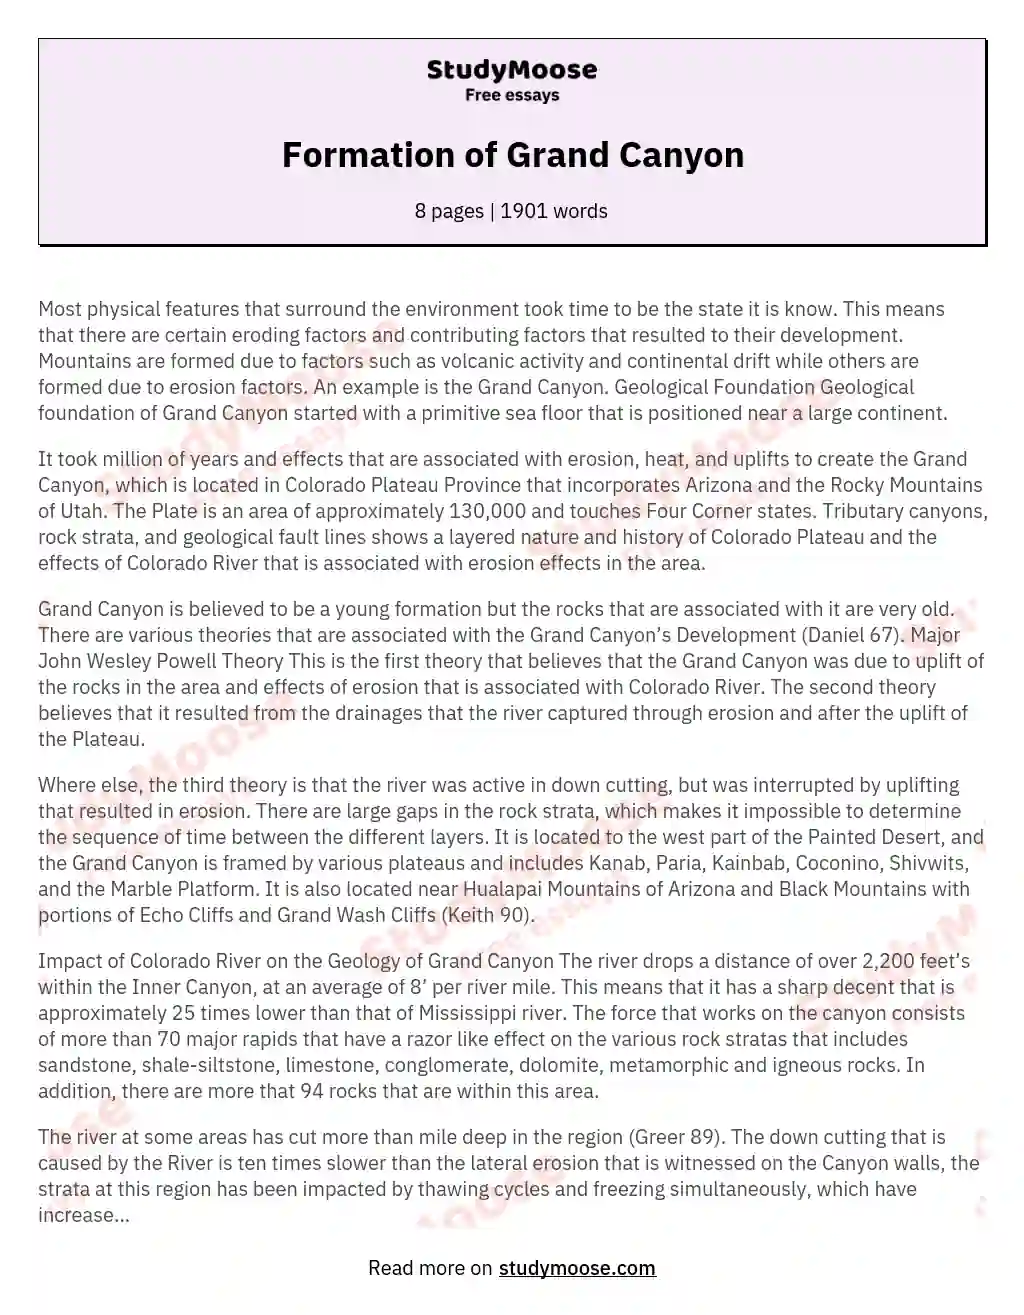 Formation of Grand Canyon essay